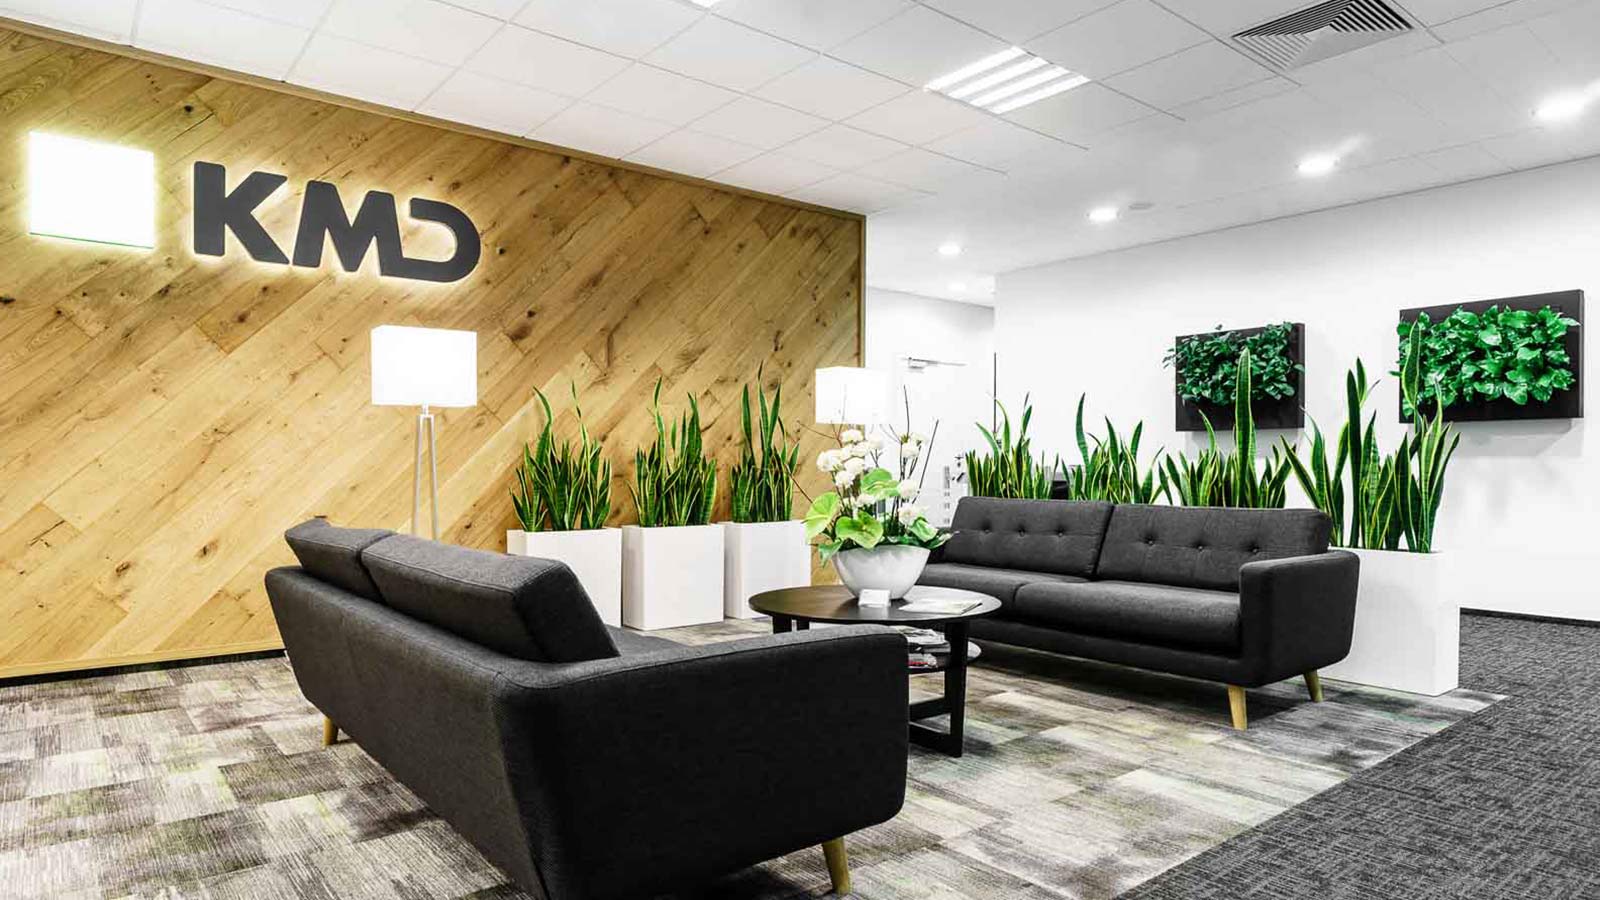 Outstanding KMD Poland office